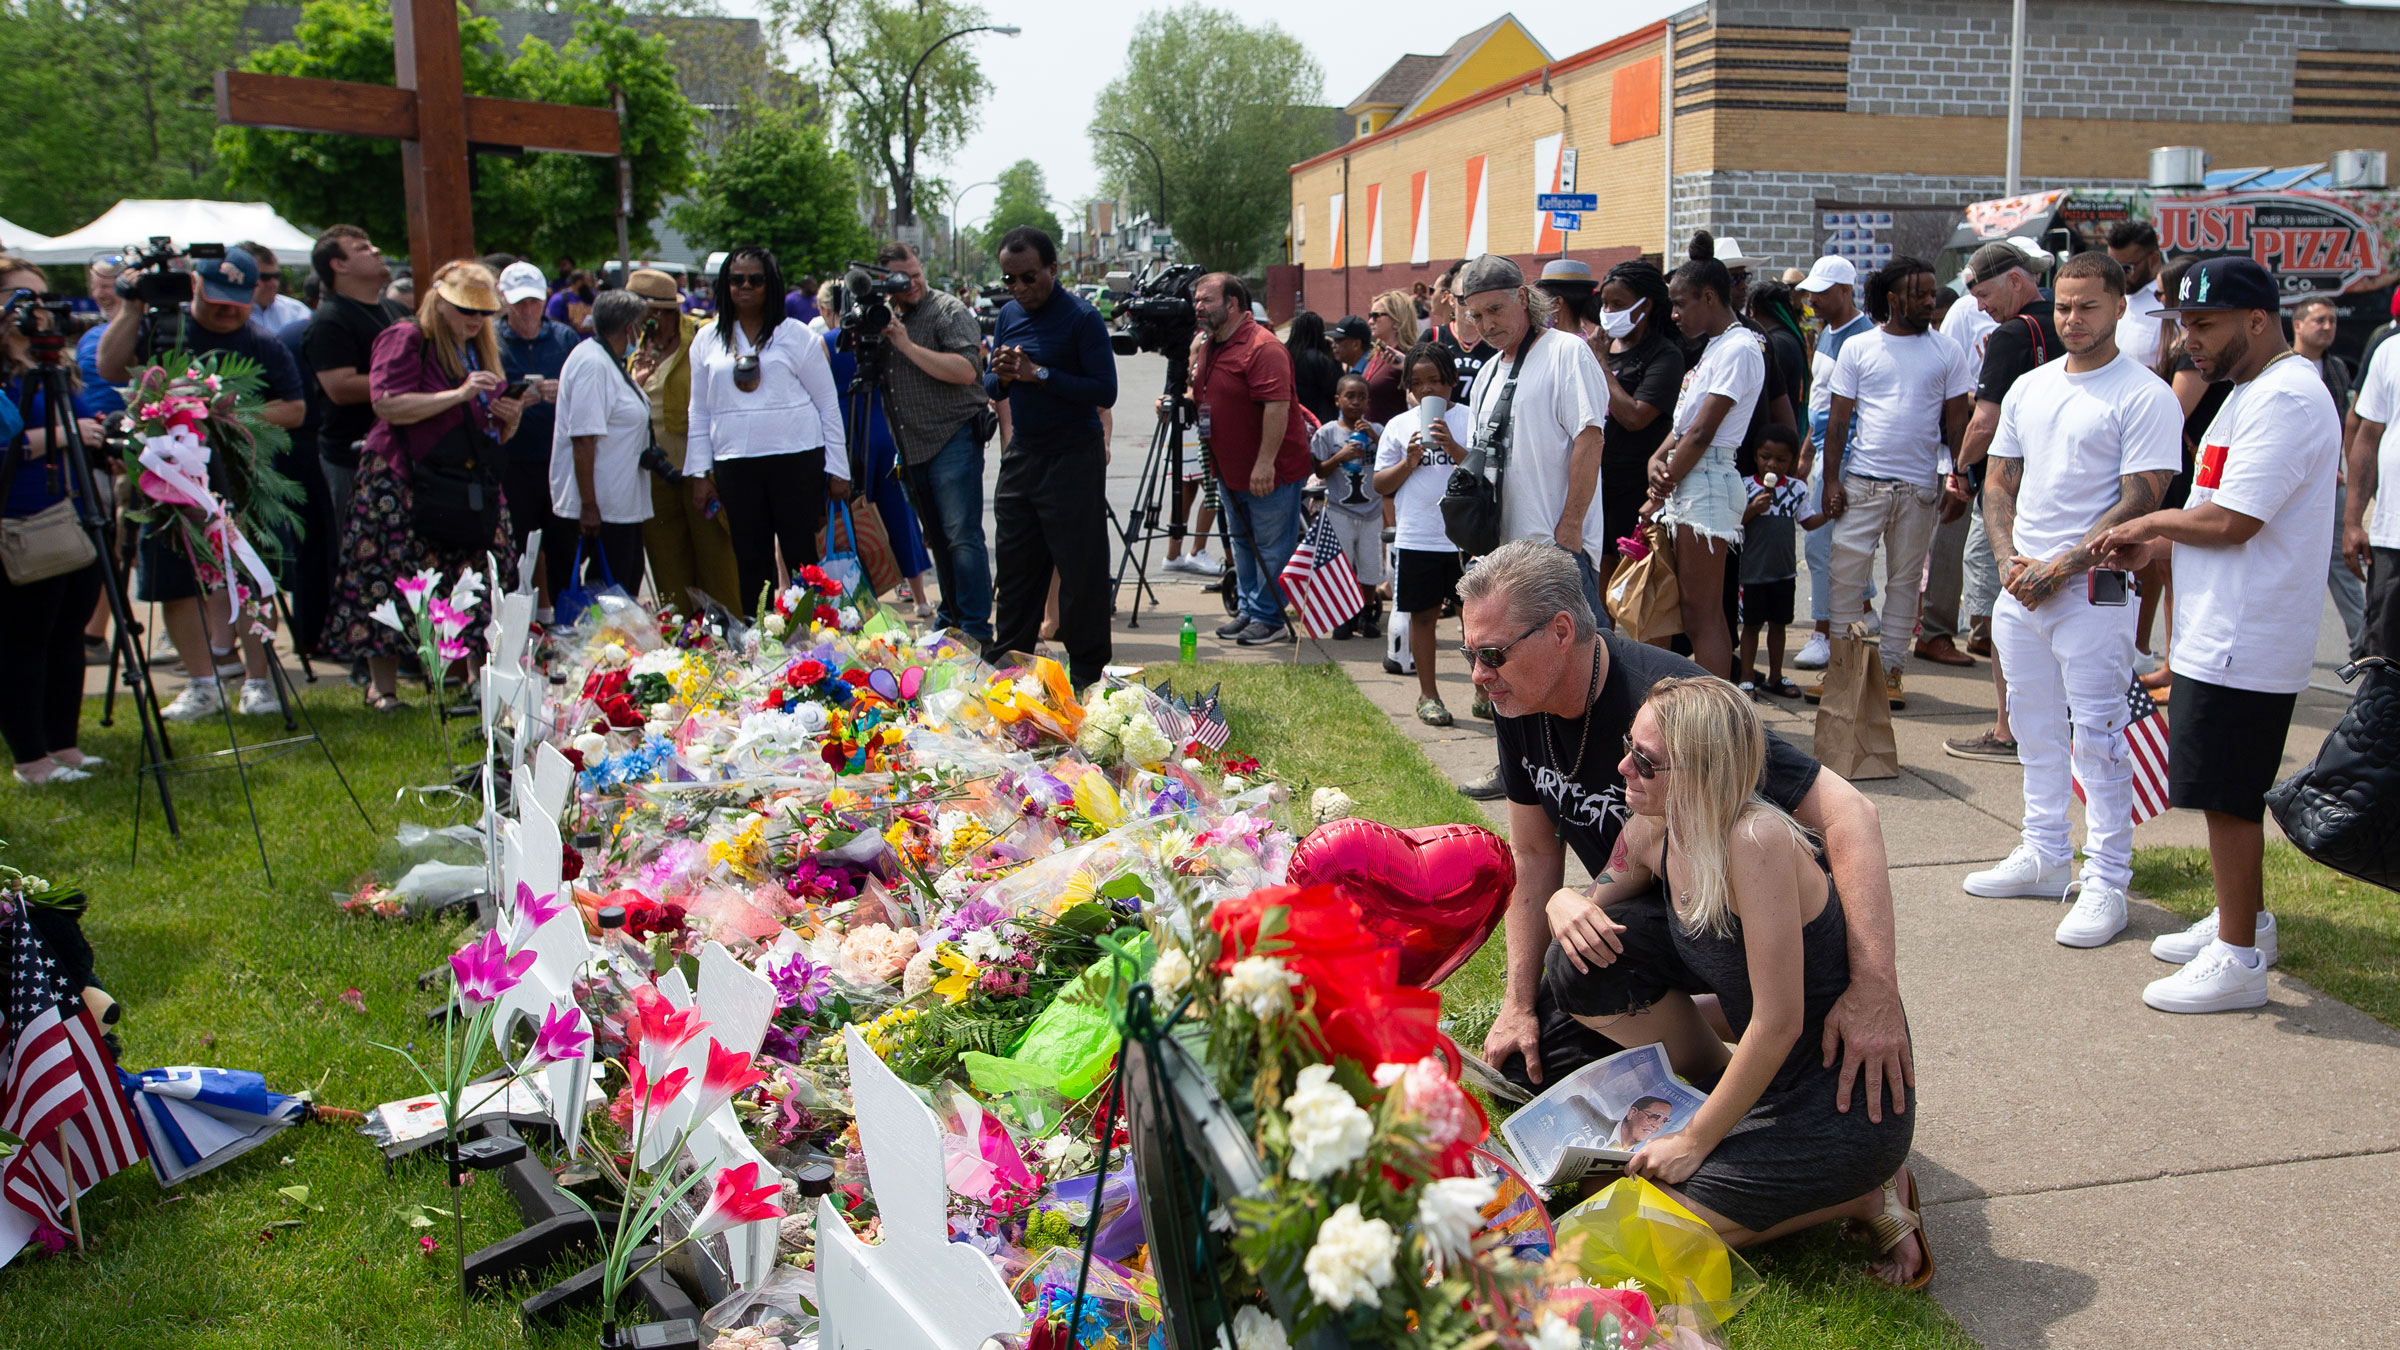 People visit a memorial May 21 for the victims of the Buffalo supermarket shooting.